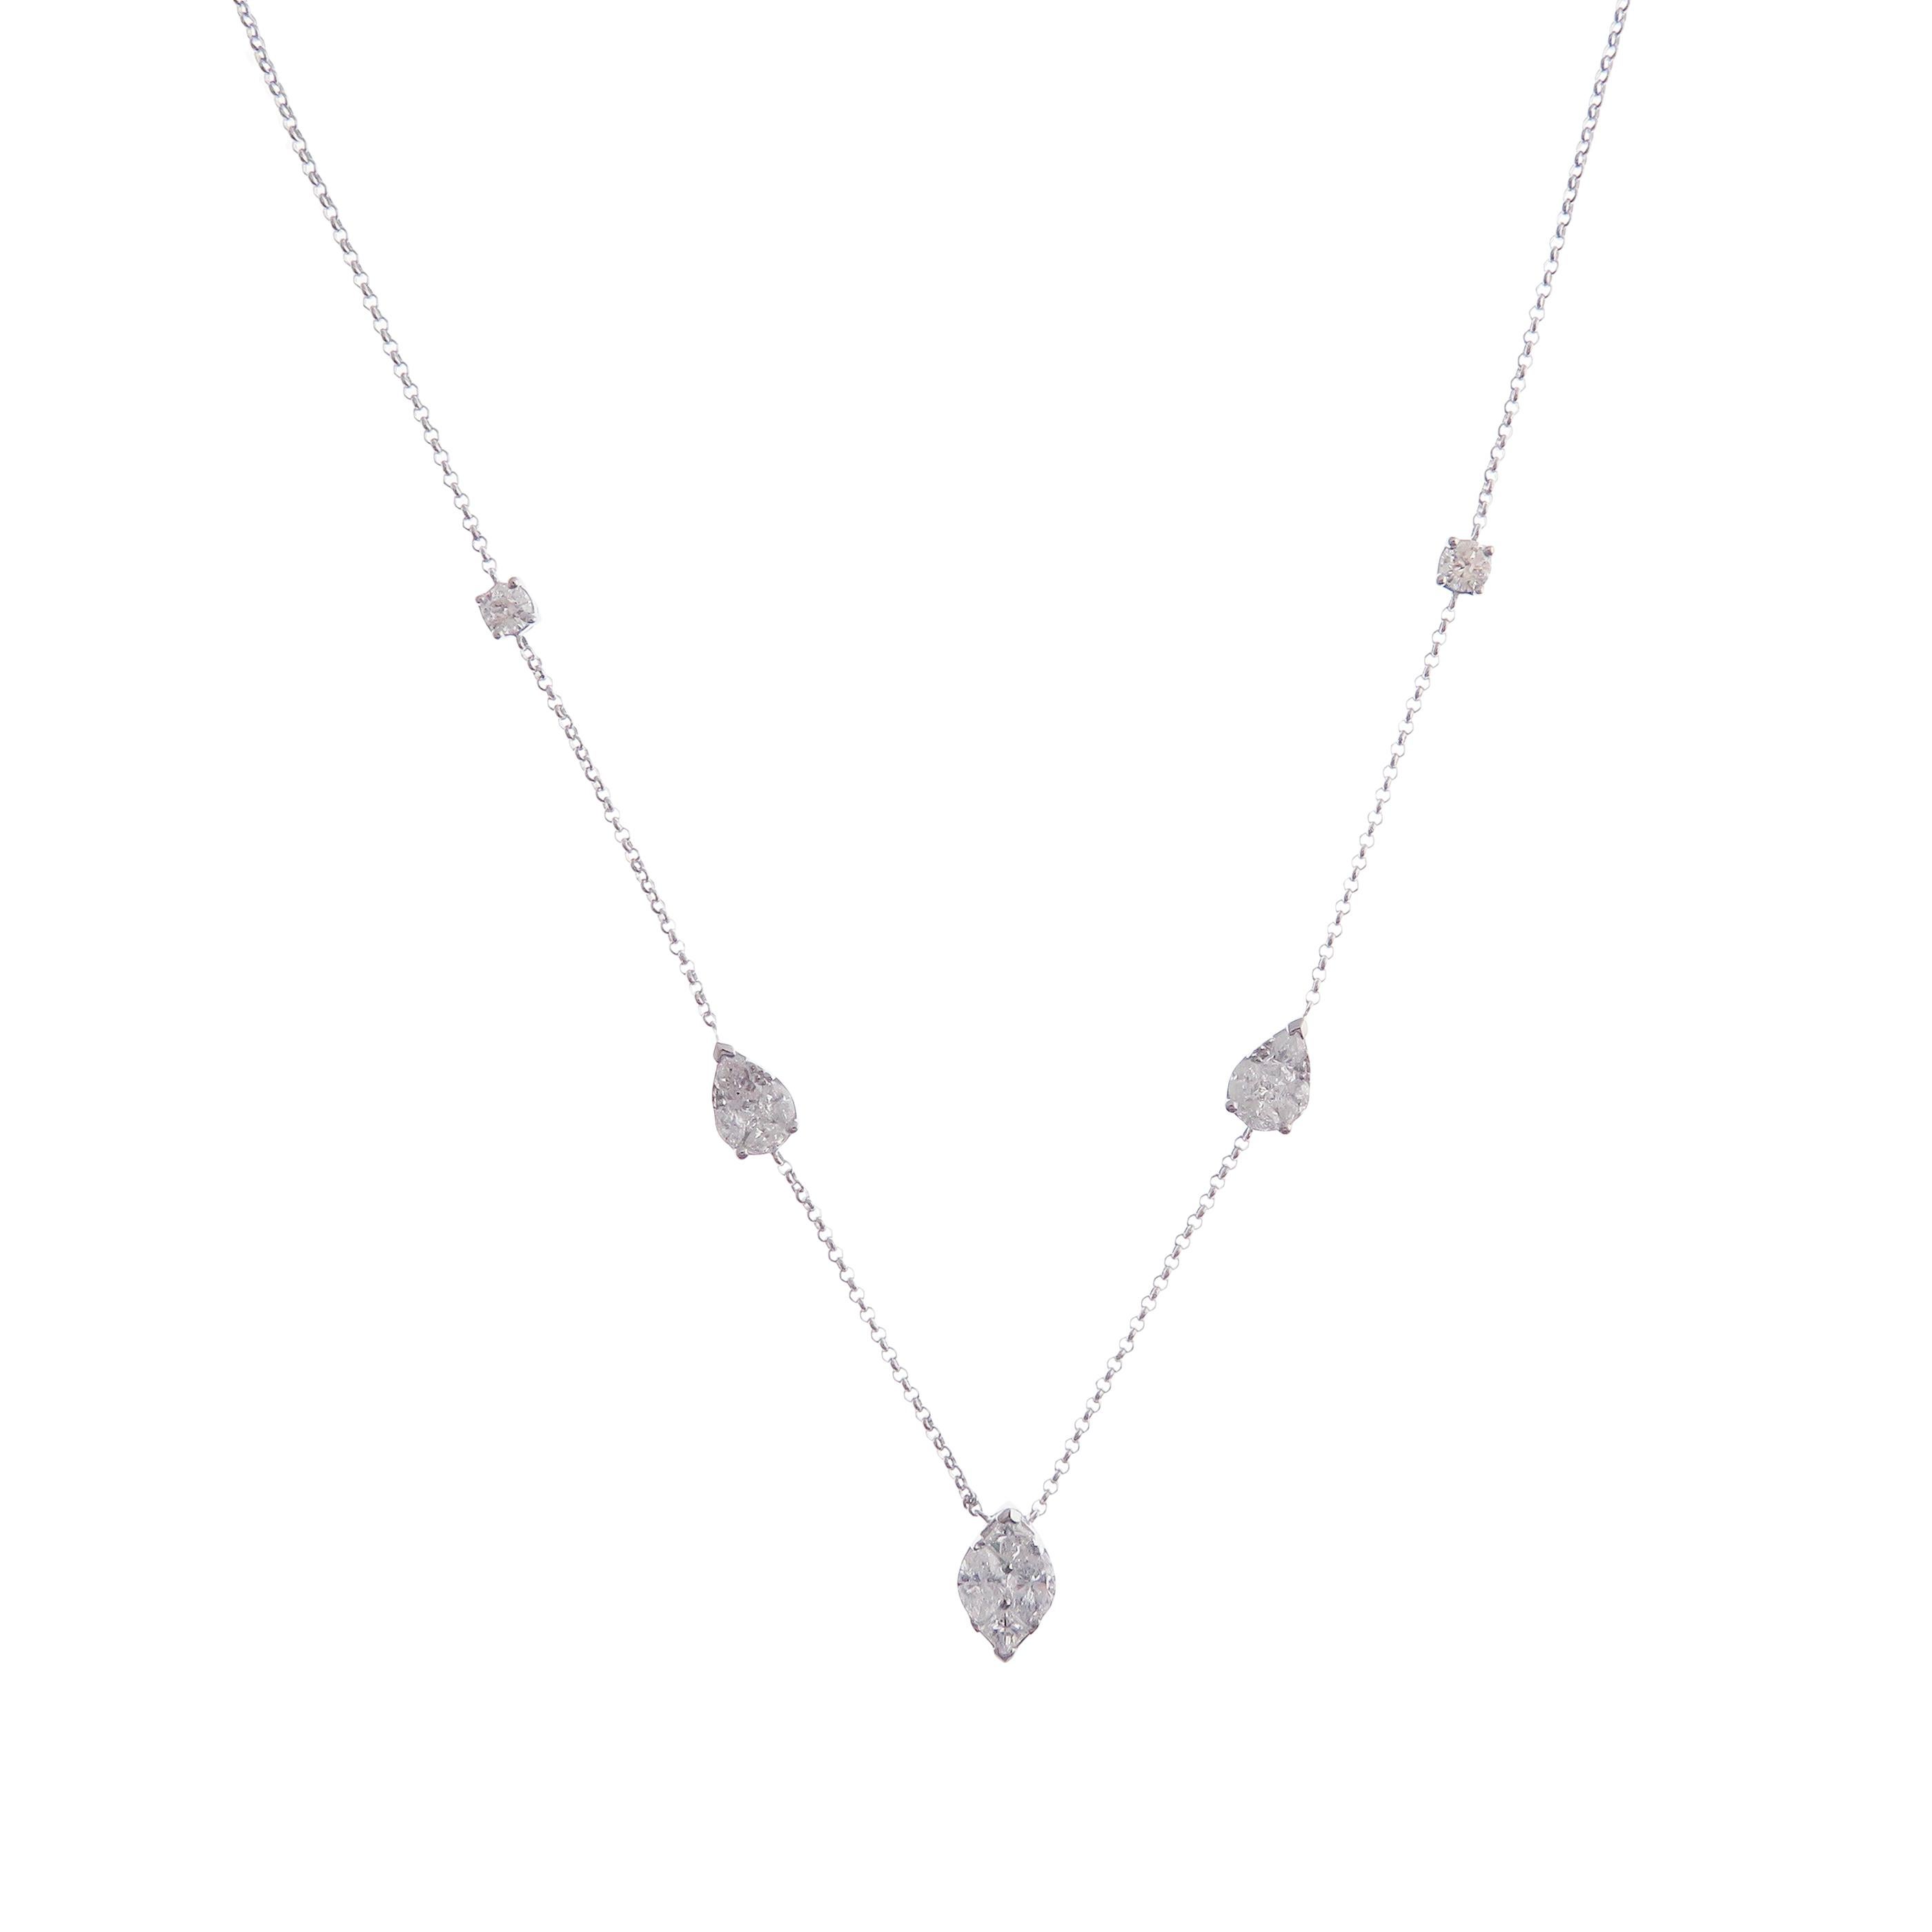 This necklace is crafted in 18-karat white gold, weighing approximately 1.65 total carats of SI-V Quality white diamond. 

Necklace is 16